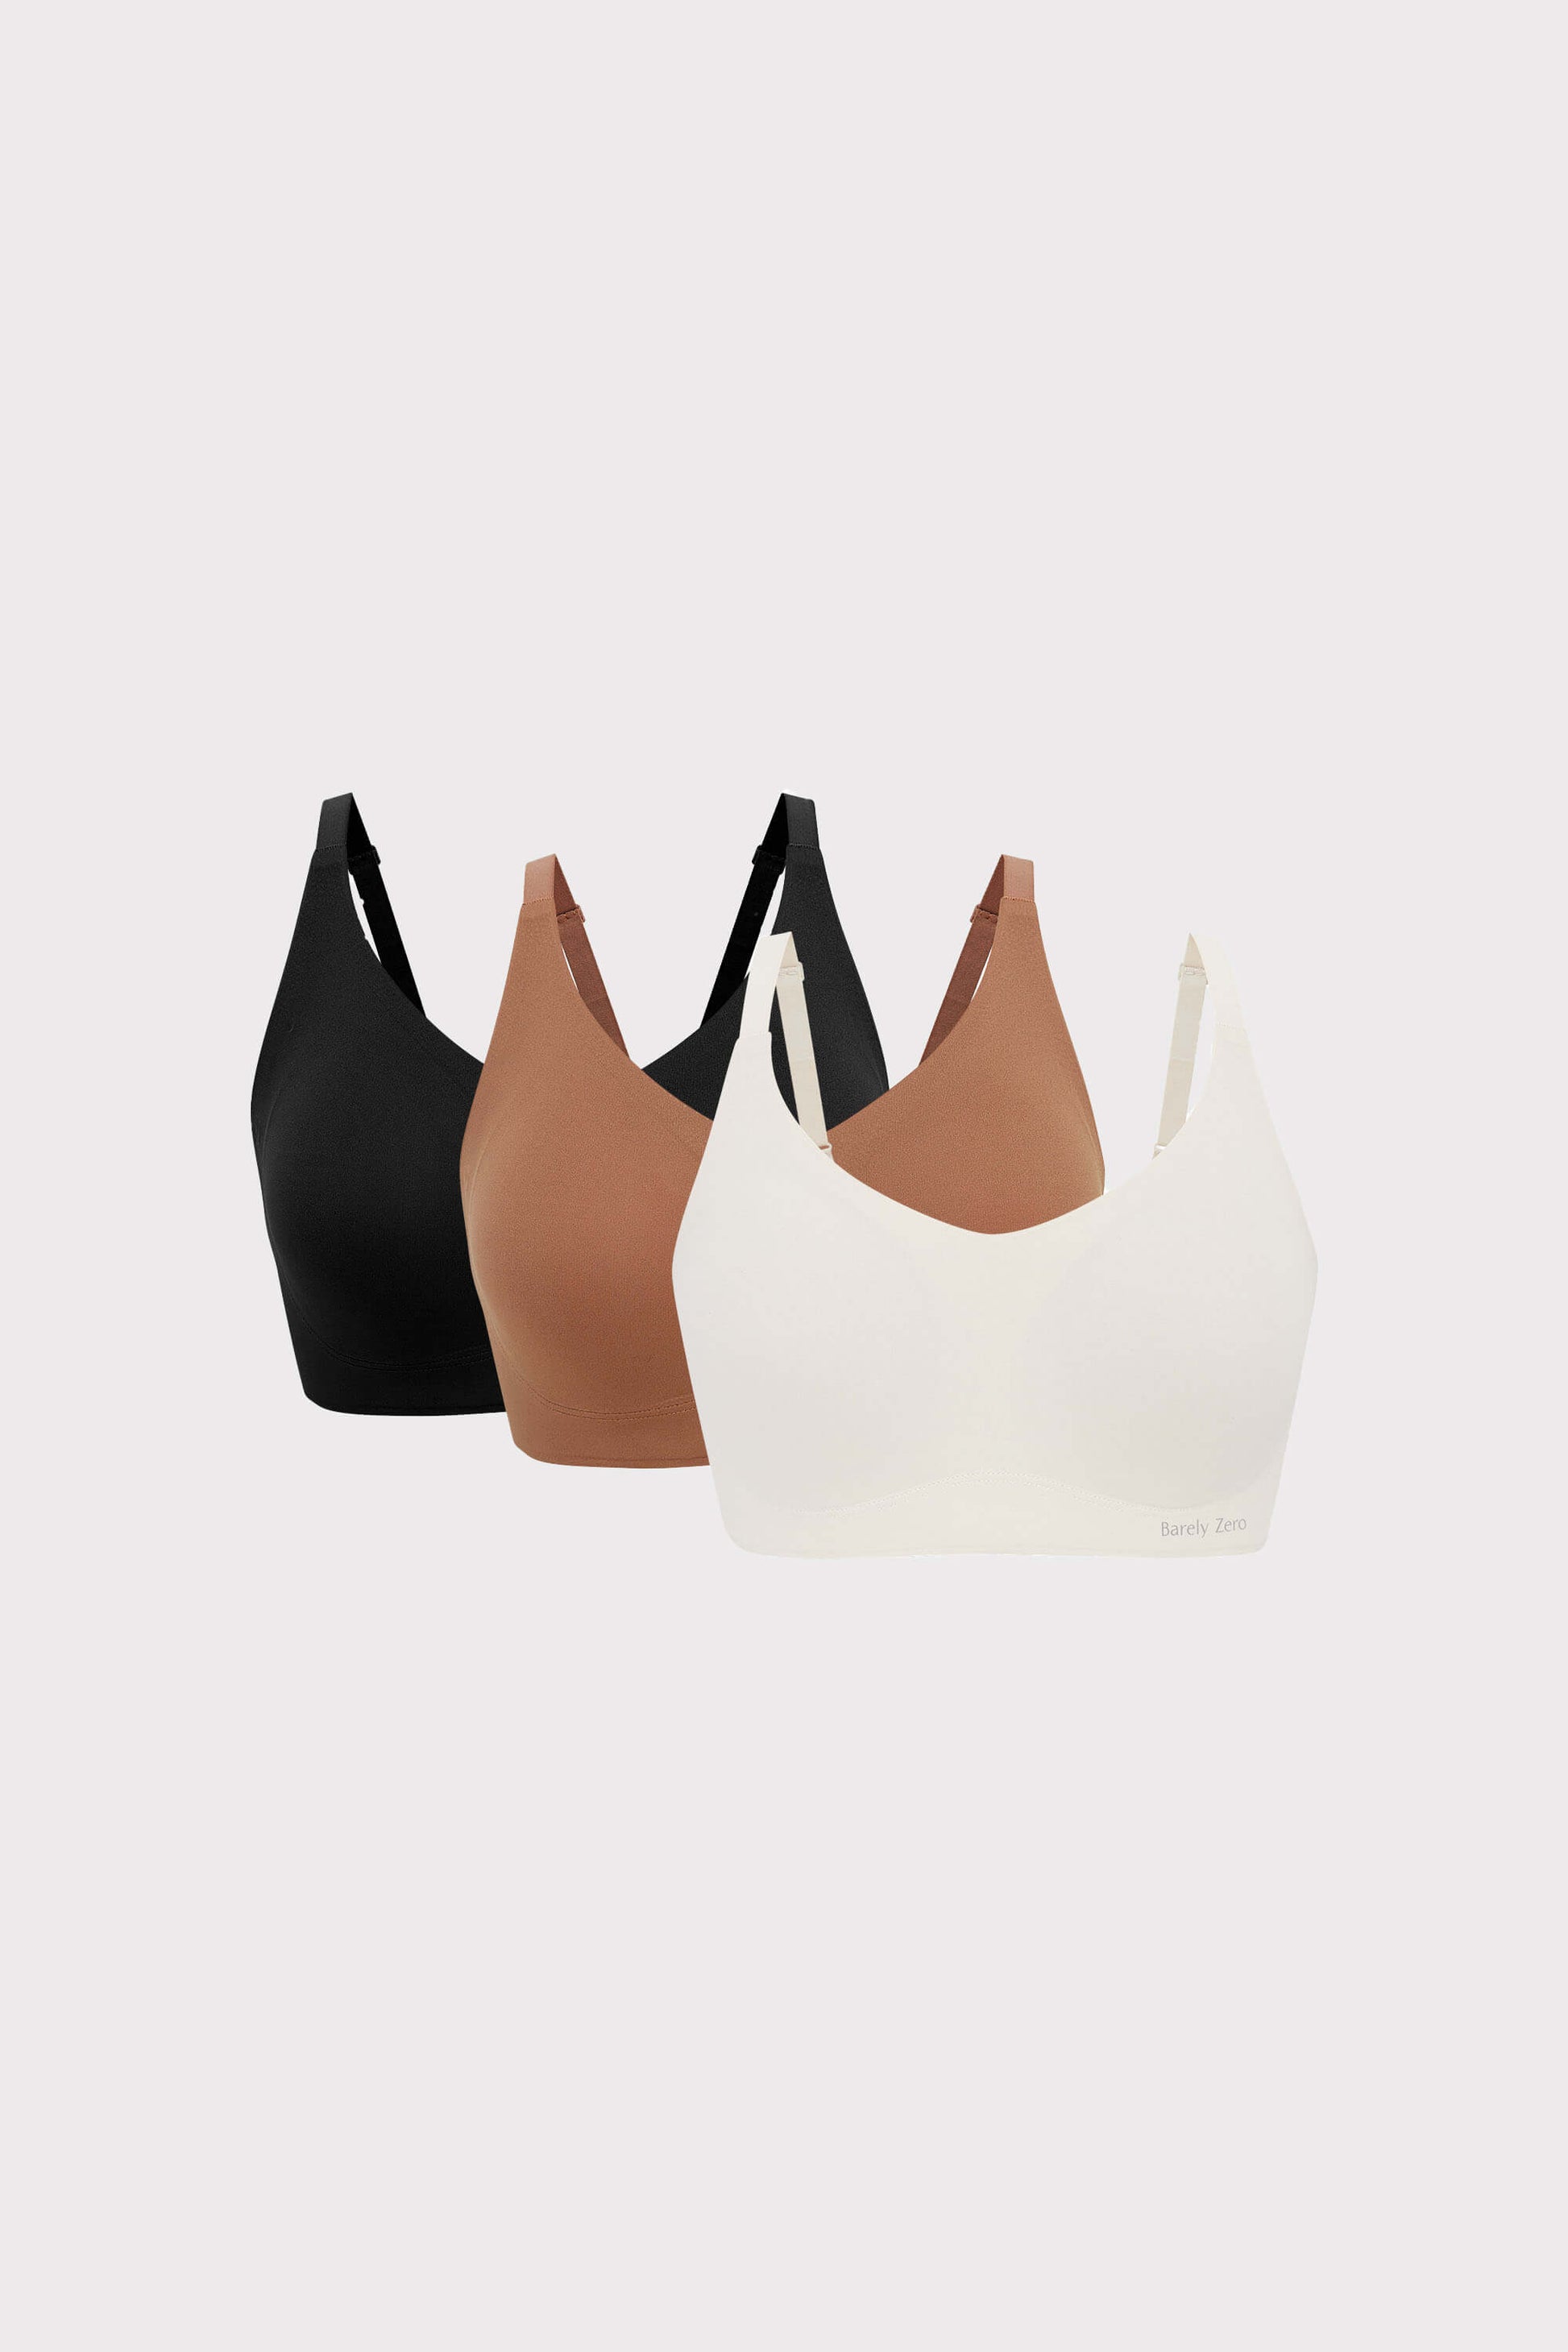 The NEW #BarelyZero Fixed Cup Wavy Bra: nothing but comfort